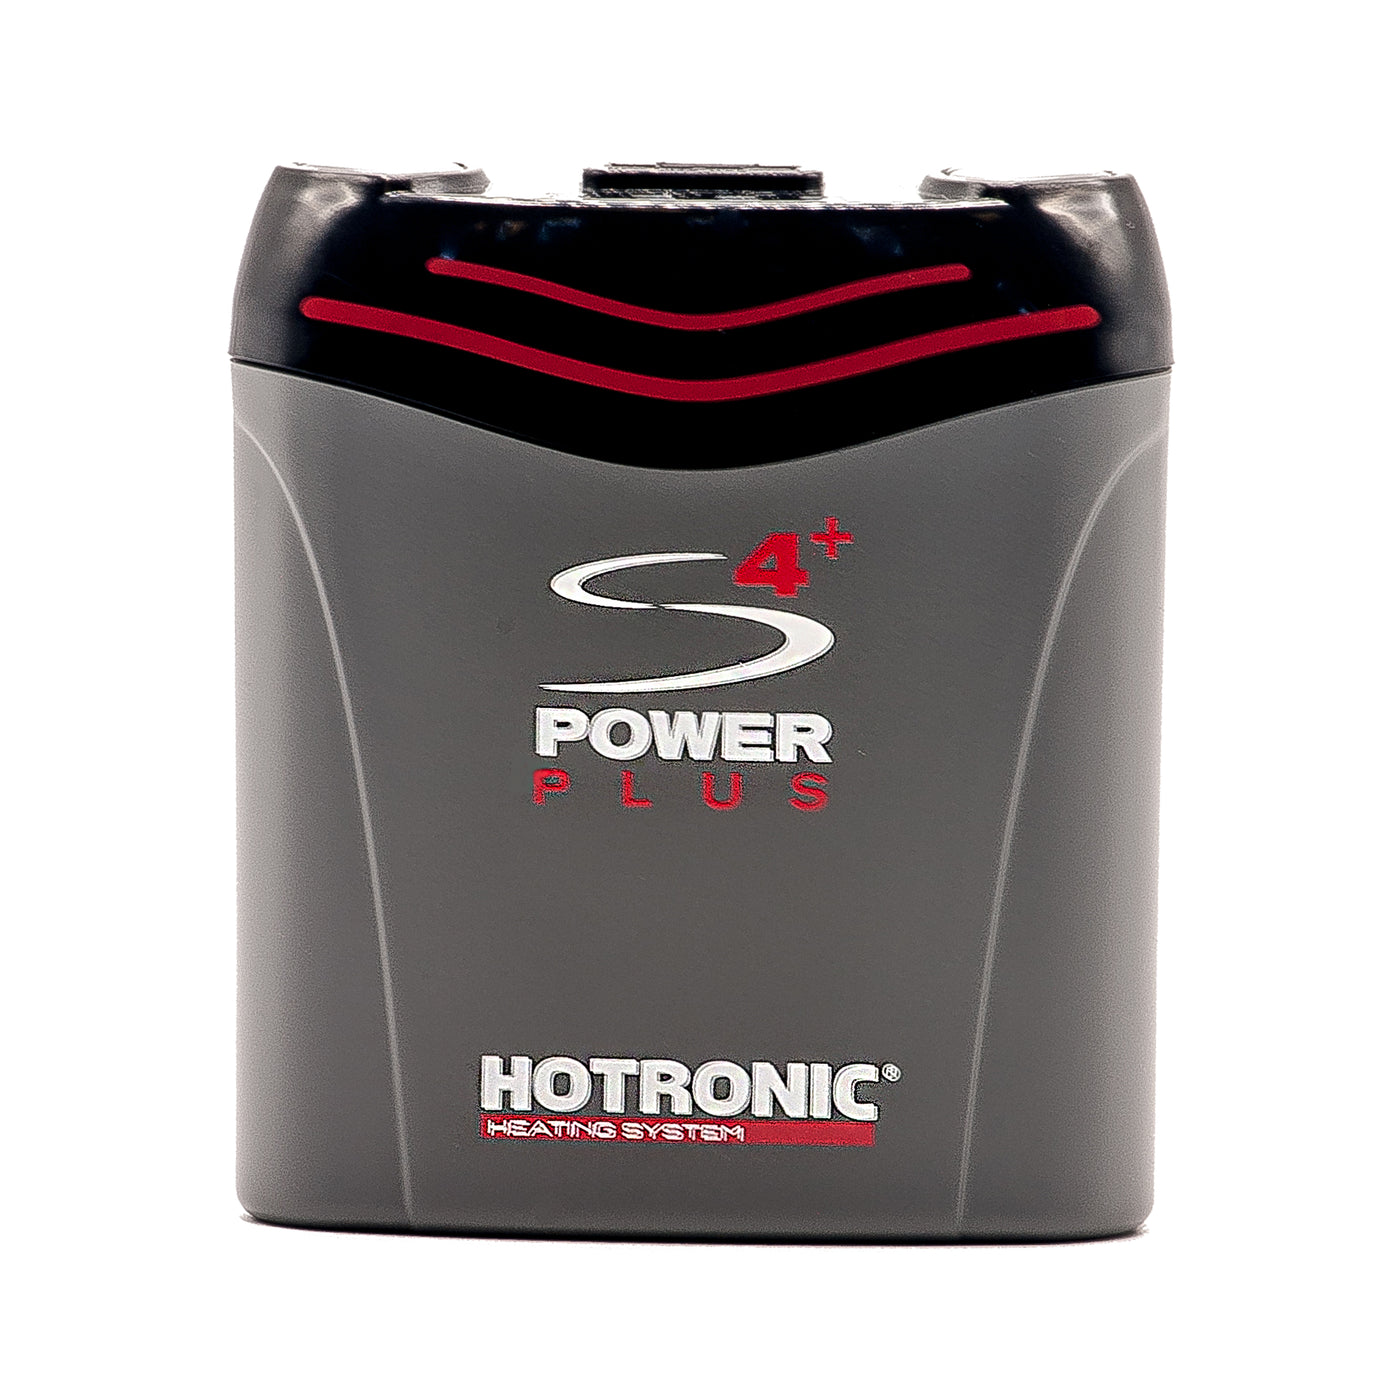 Hotronic Power Plus S4+ Battery Pack (Open Box Return) HEATED ACCESSORIES Hotronic   